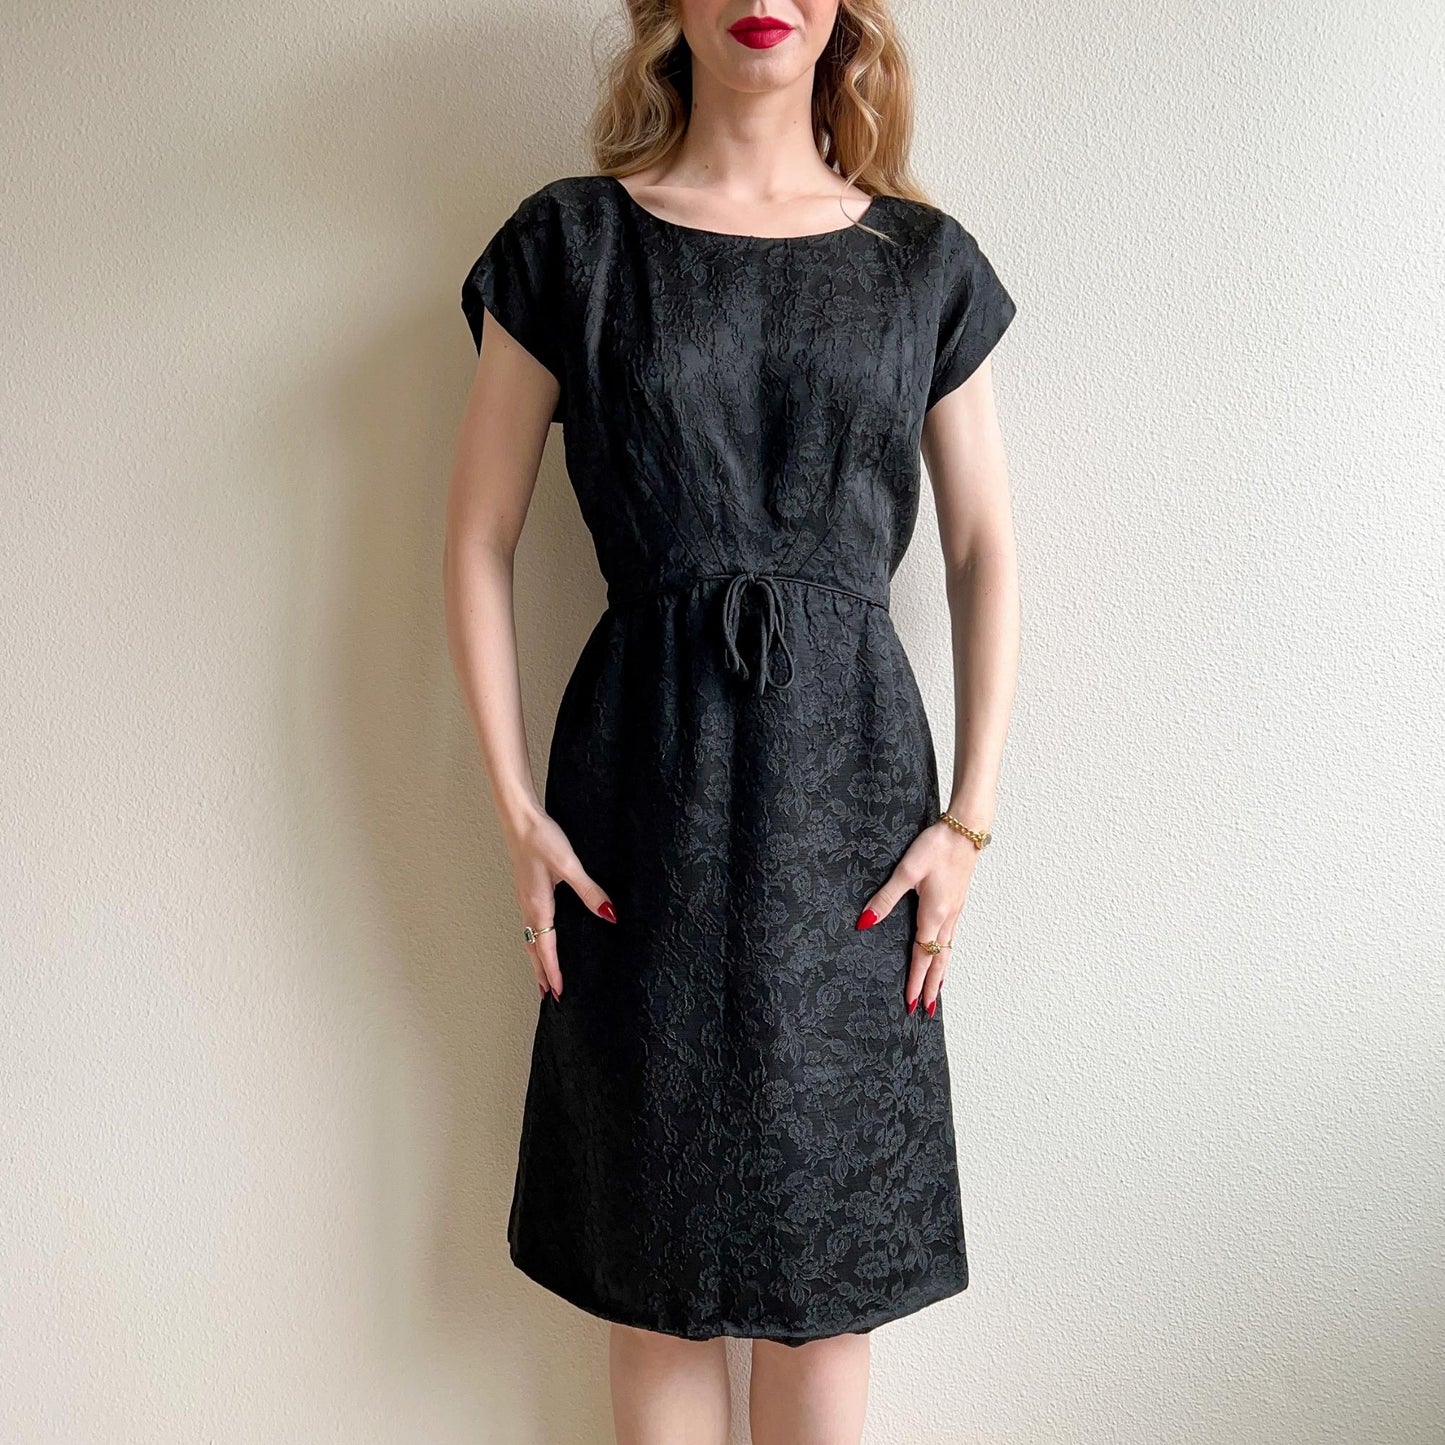 1960s Black Floral Sheath Dress With Matching Coat (S/M)